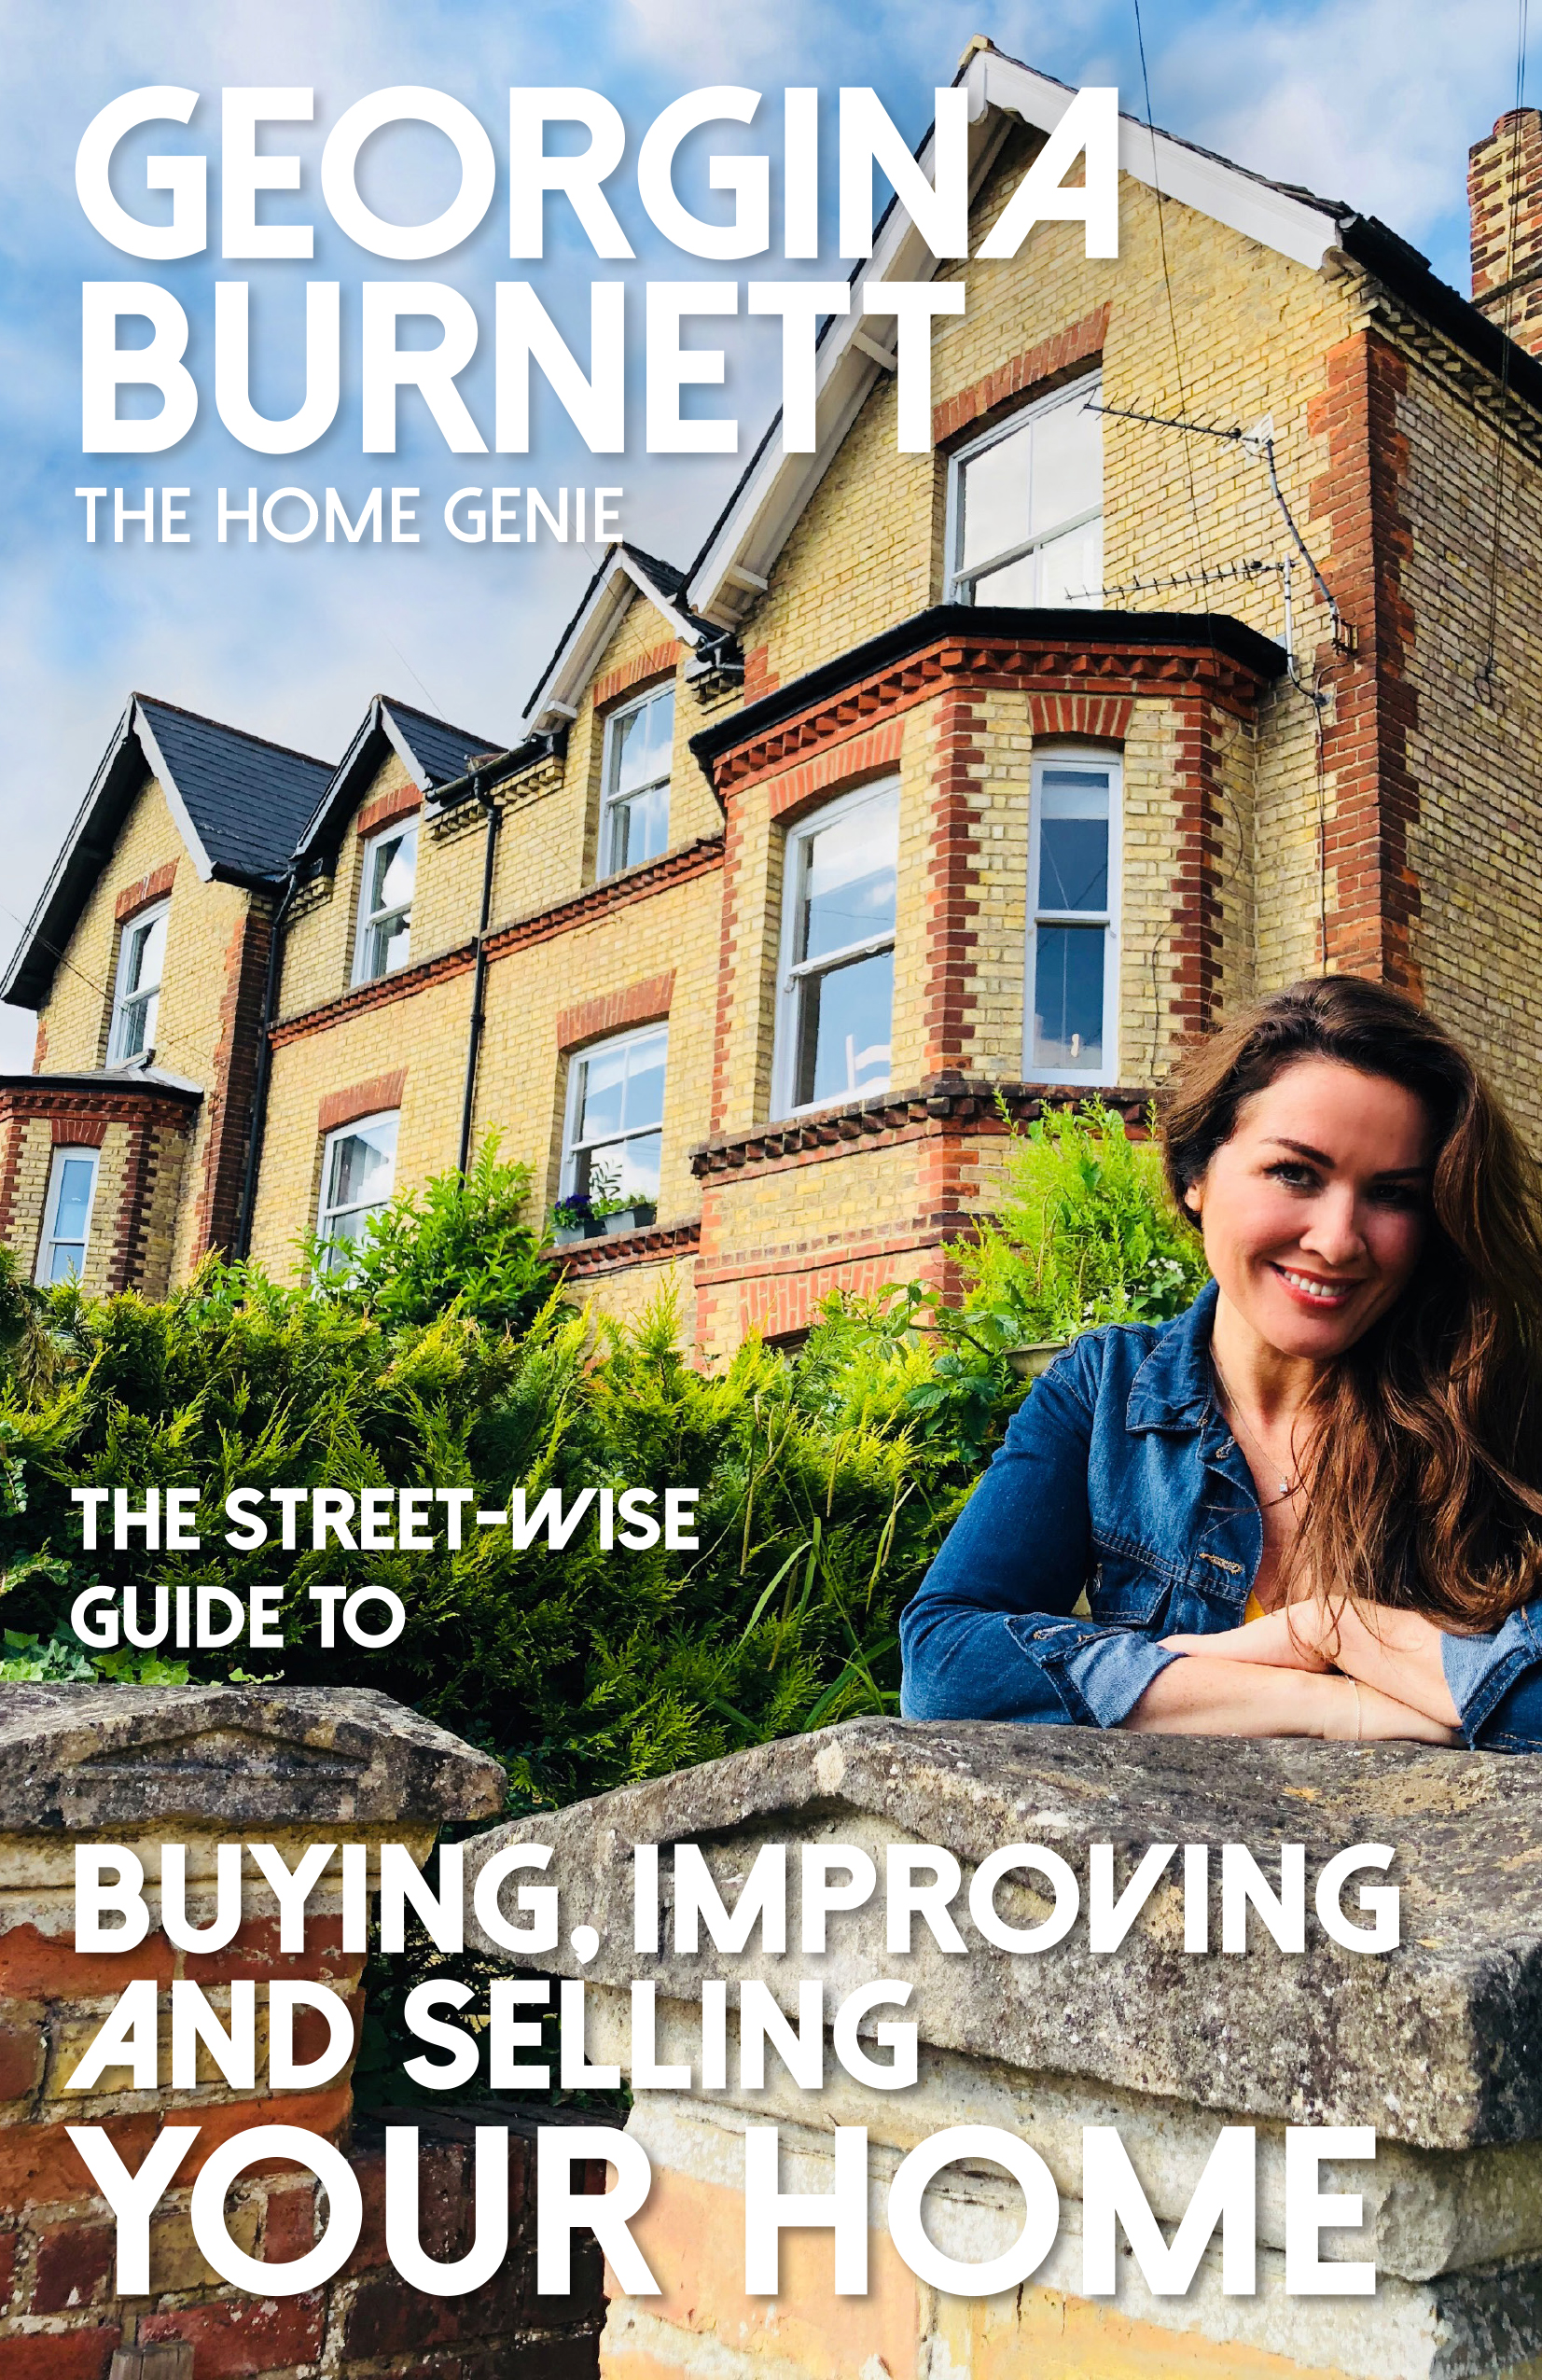 the street-wise guide to buy-in, improving and selling your home